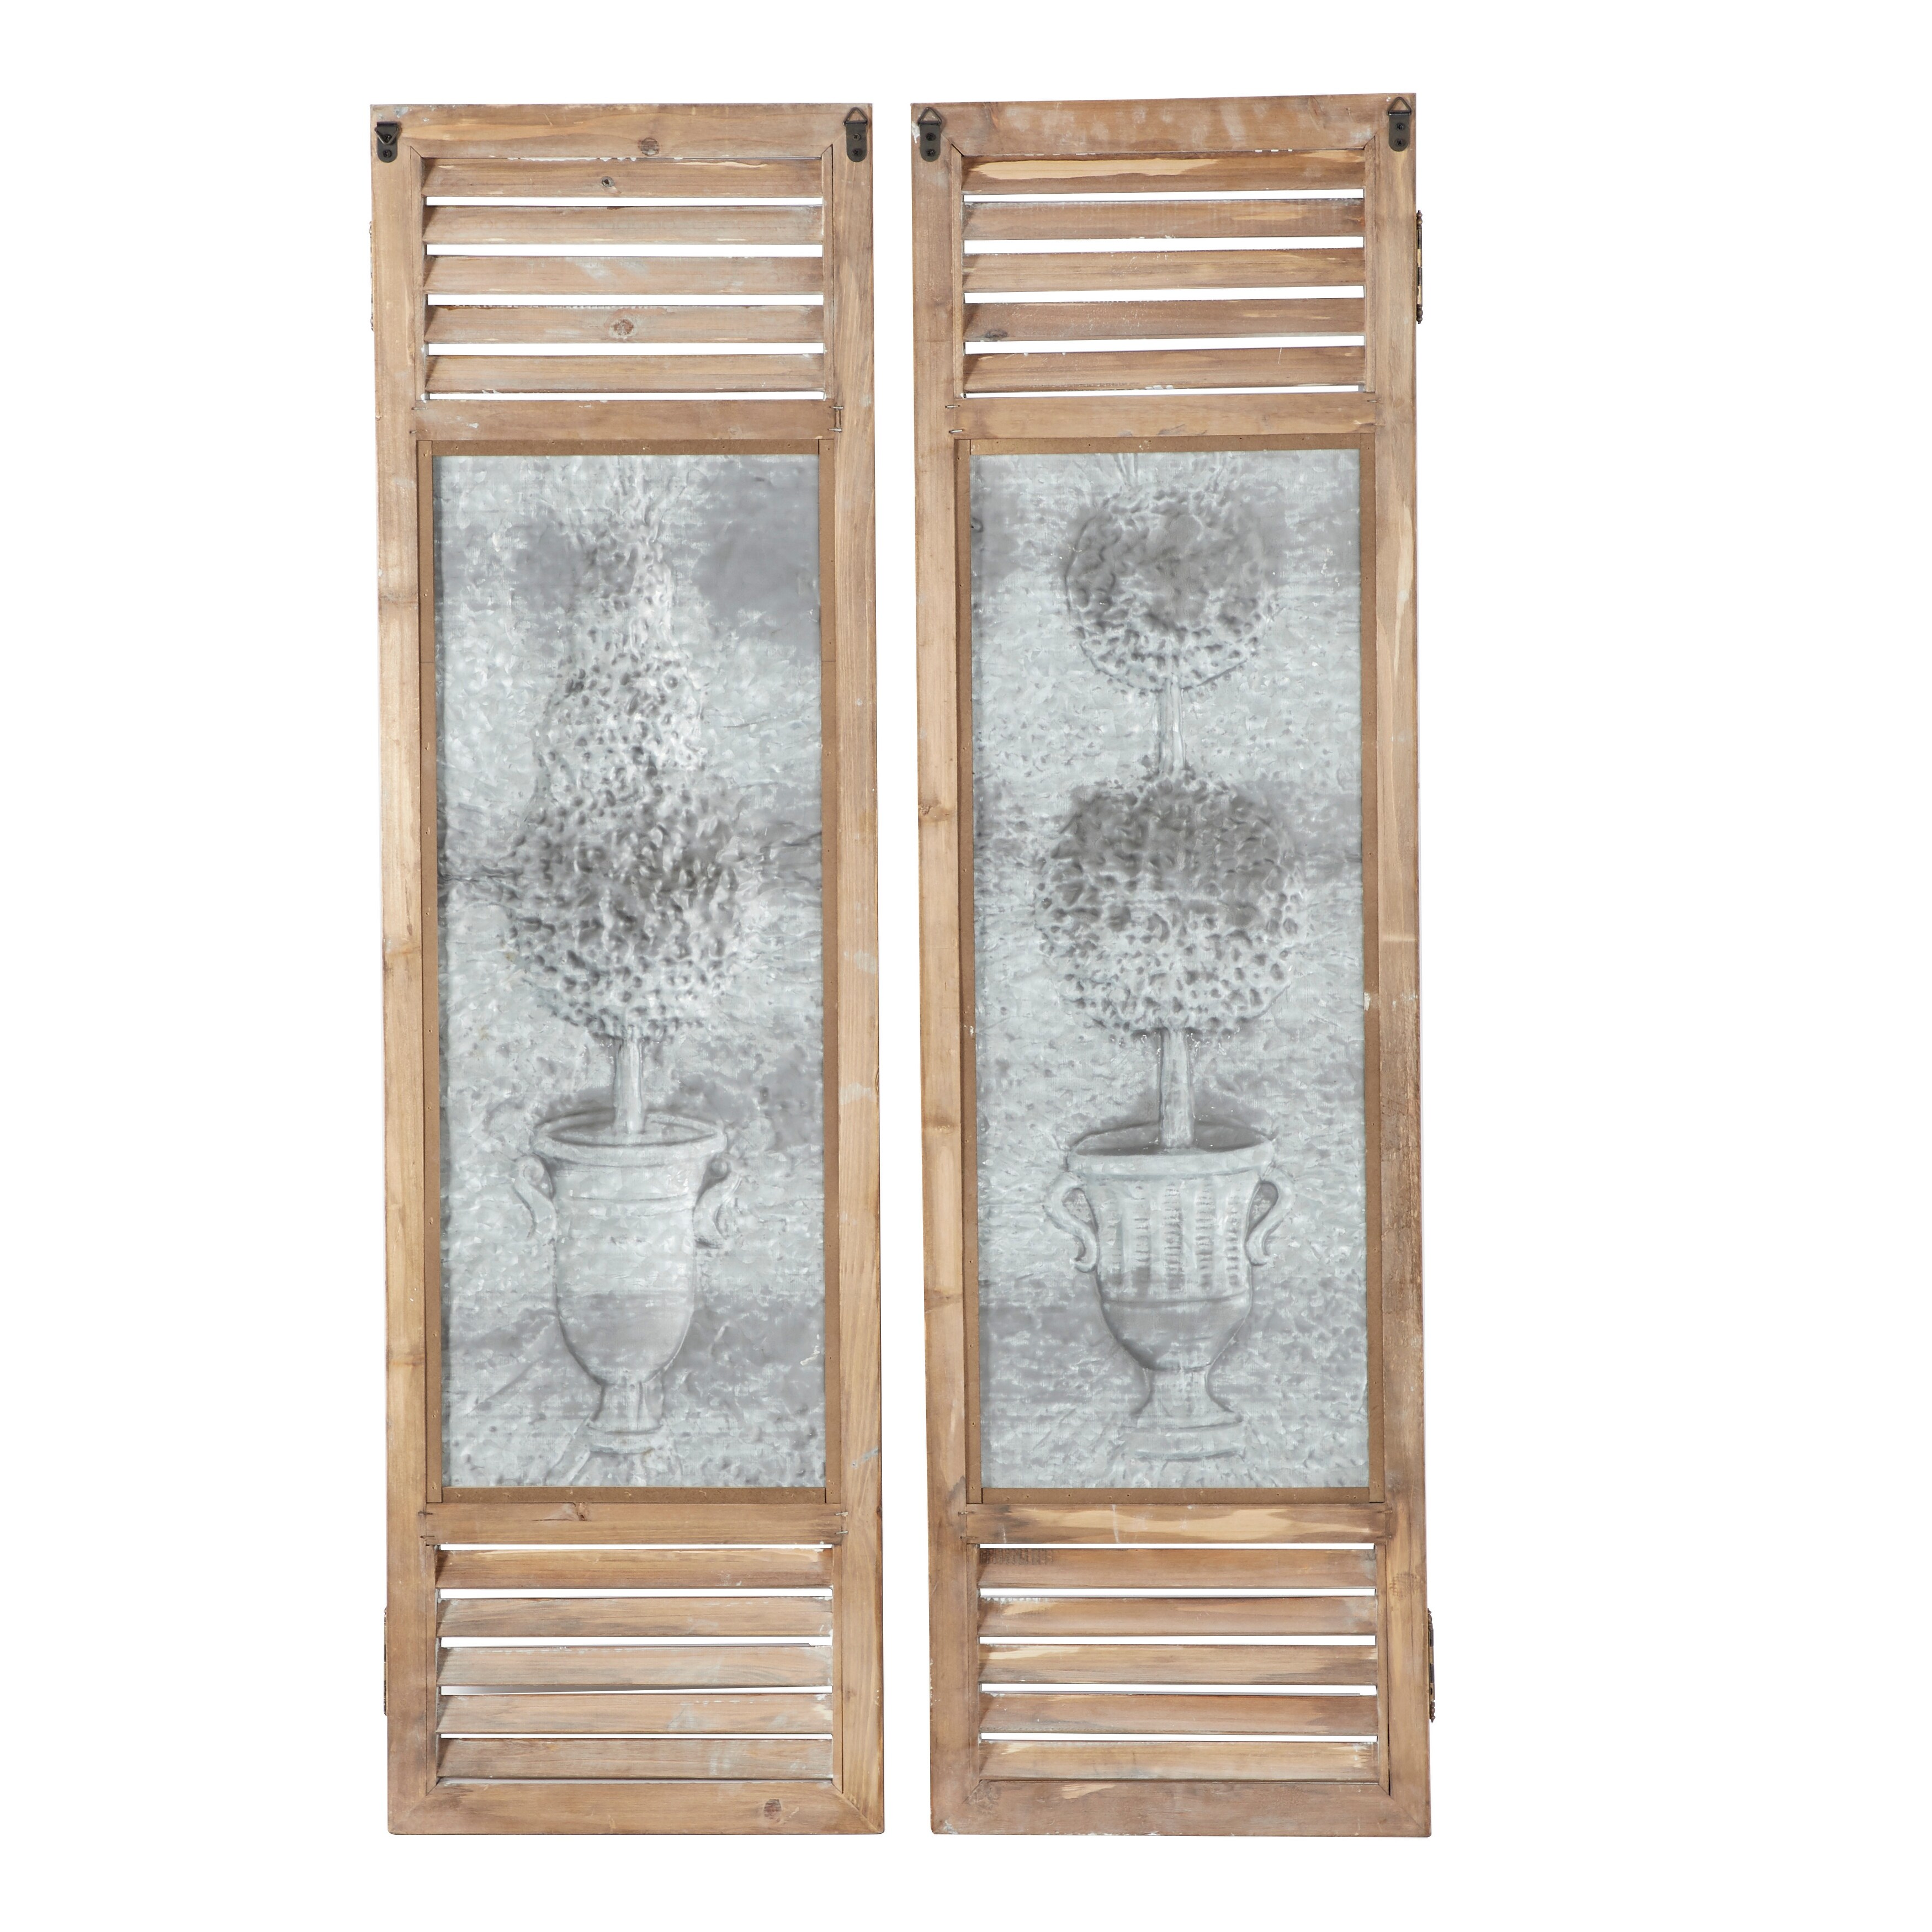 Brown Metal Relief Tree Wall Decor with Louvered Design (Set of 2)